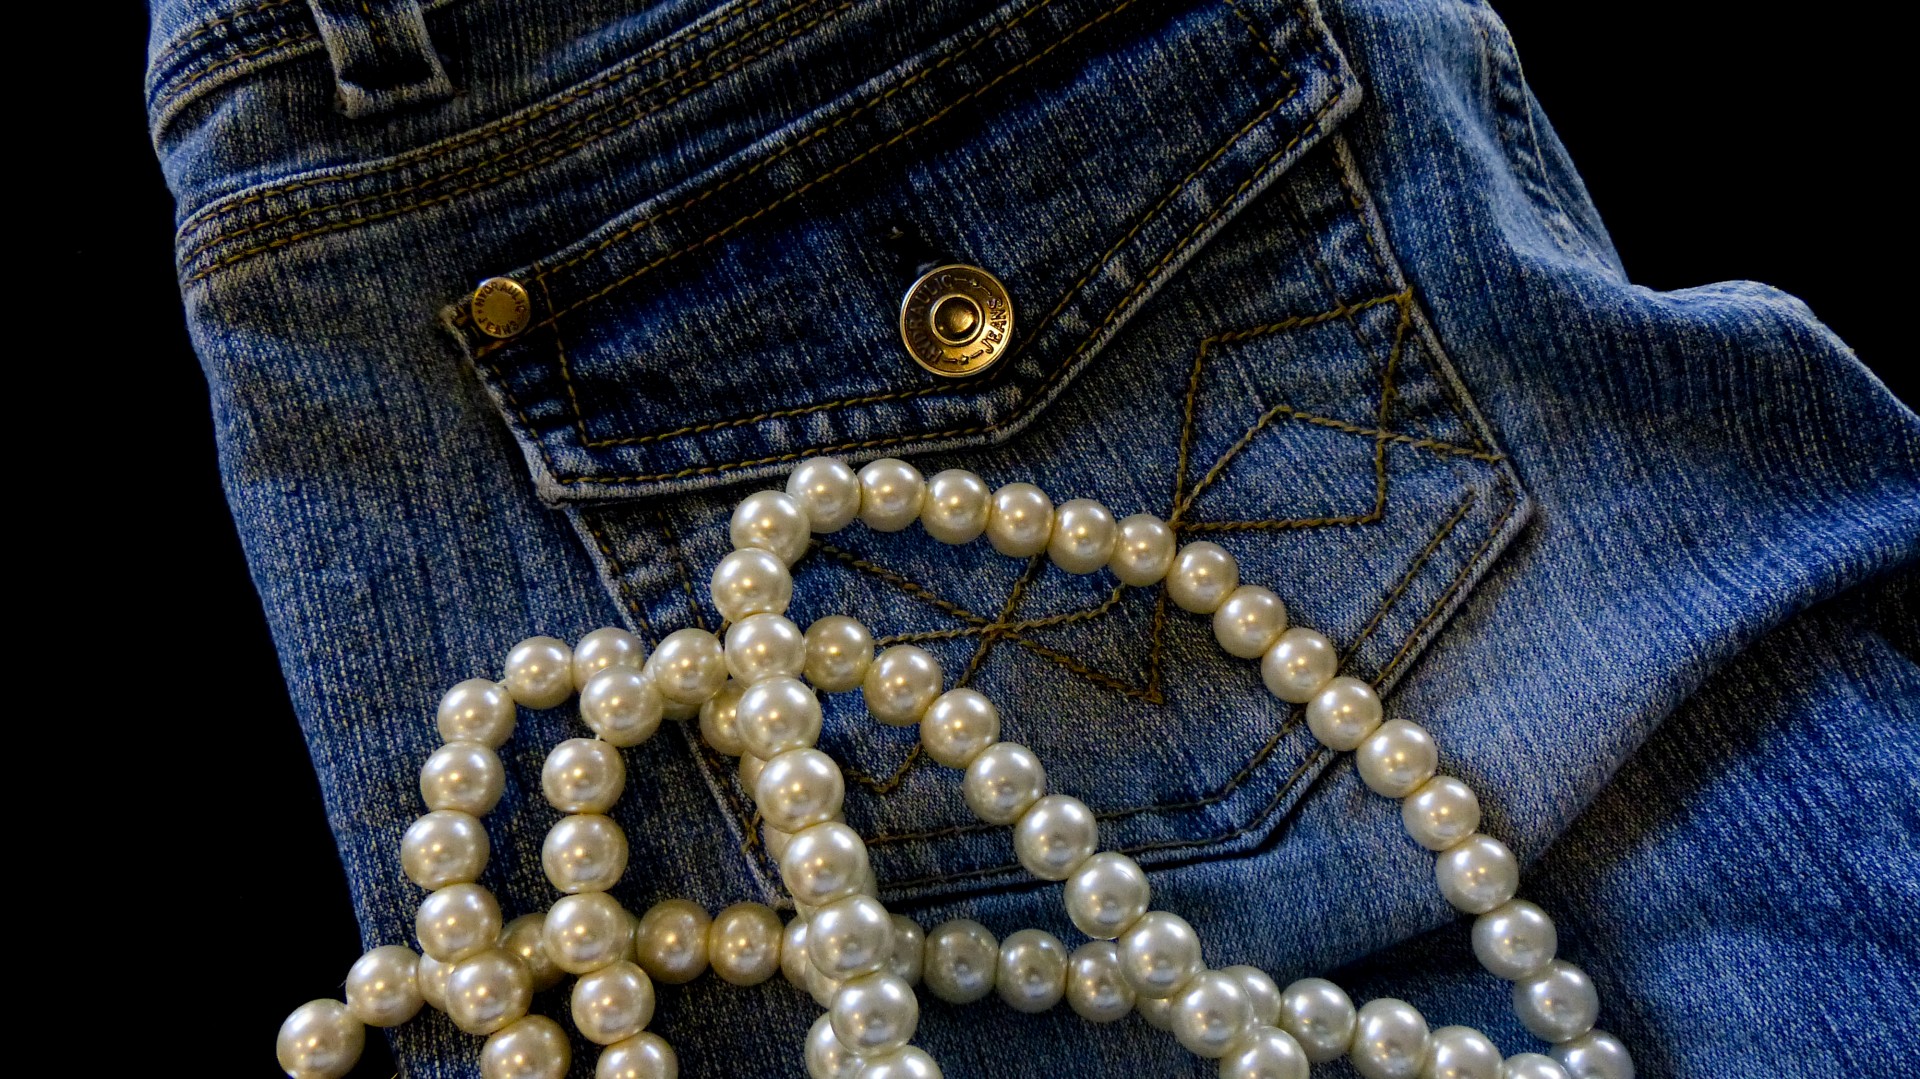 Download free photo of Opposites attract,jeans,pearls,denim,jewelry - from ...